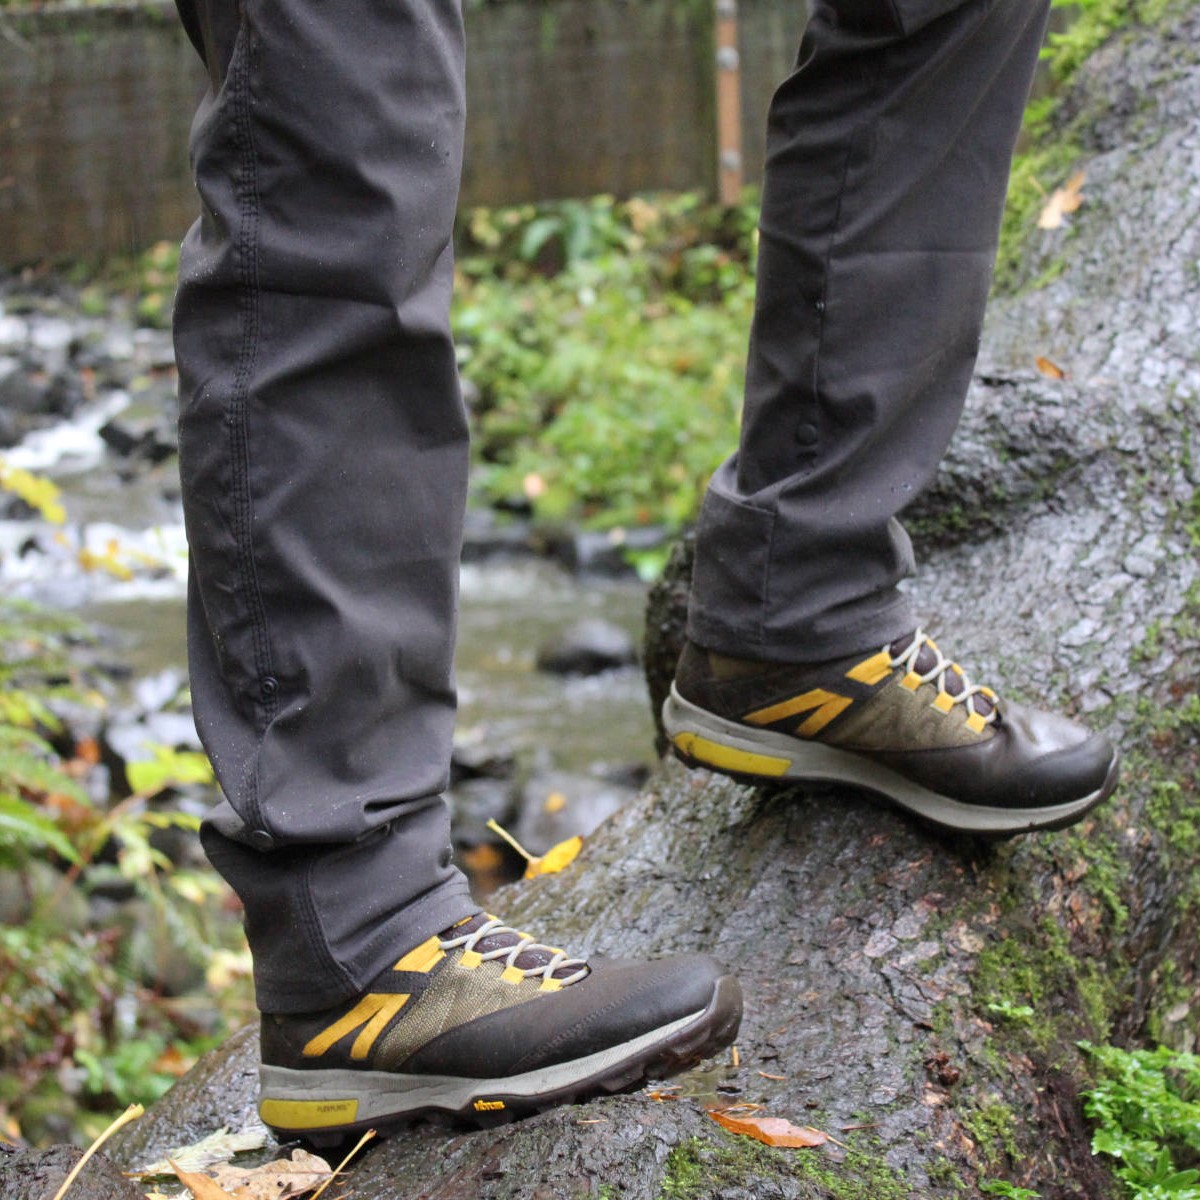 A good pair of beginner hiking boots like these Merrells standing on a wet log - HelloTrail